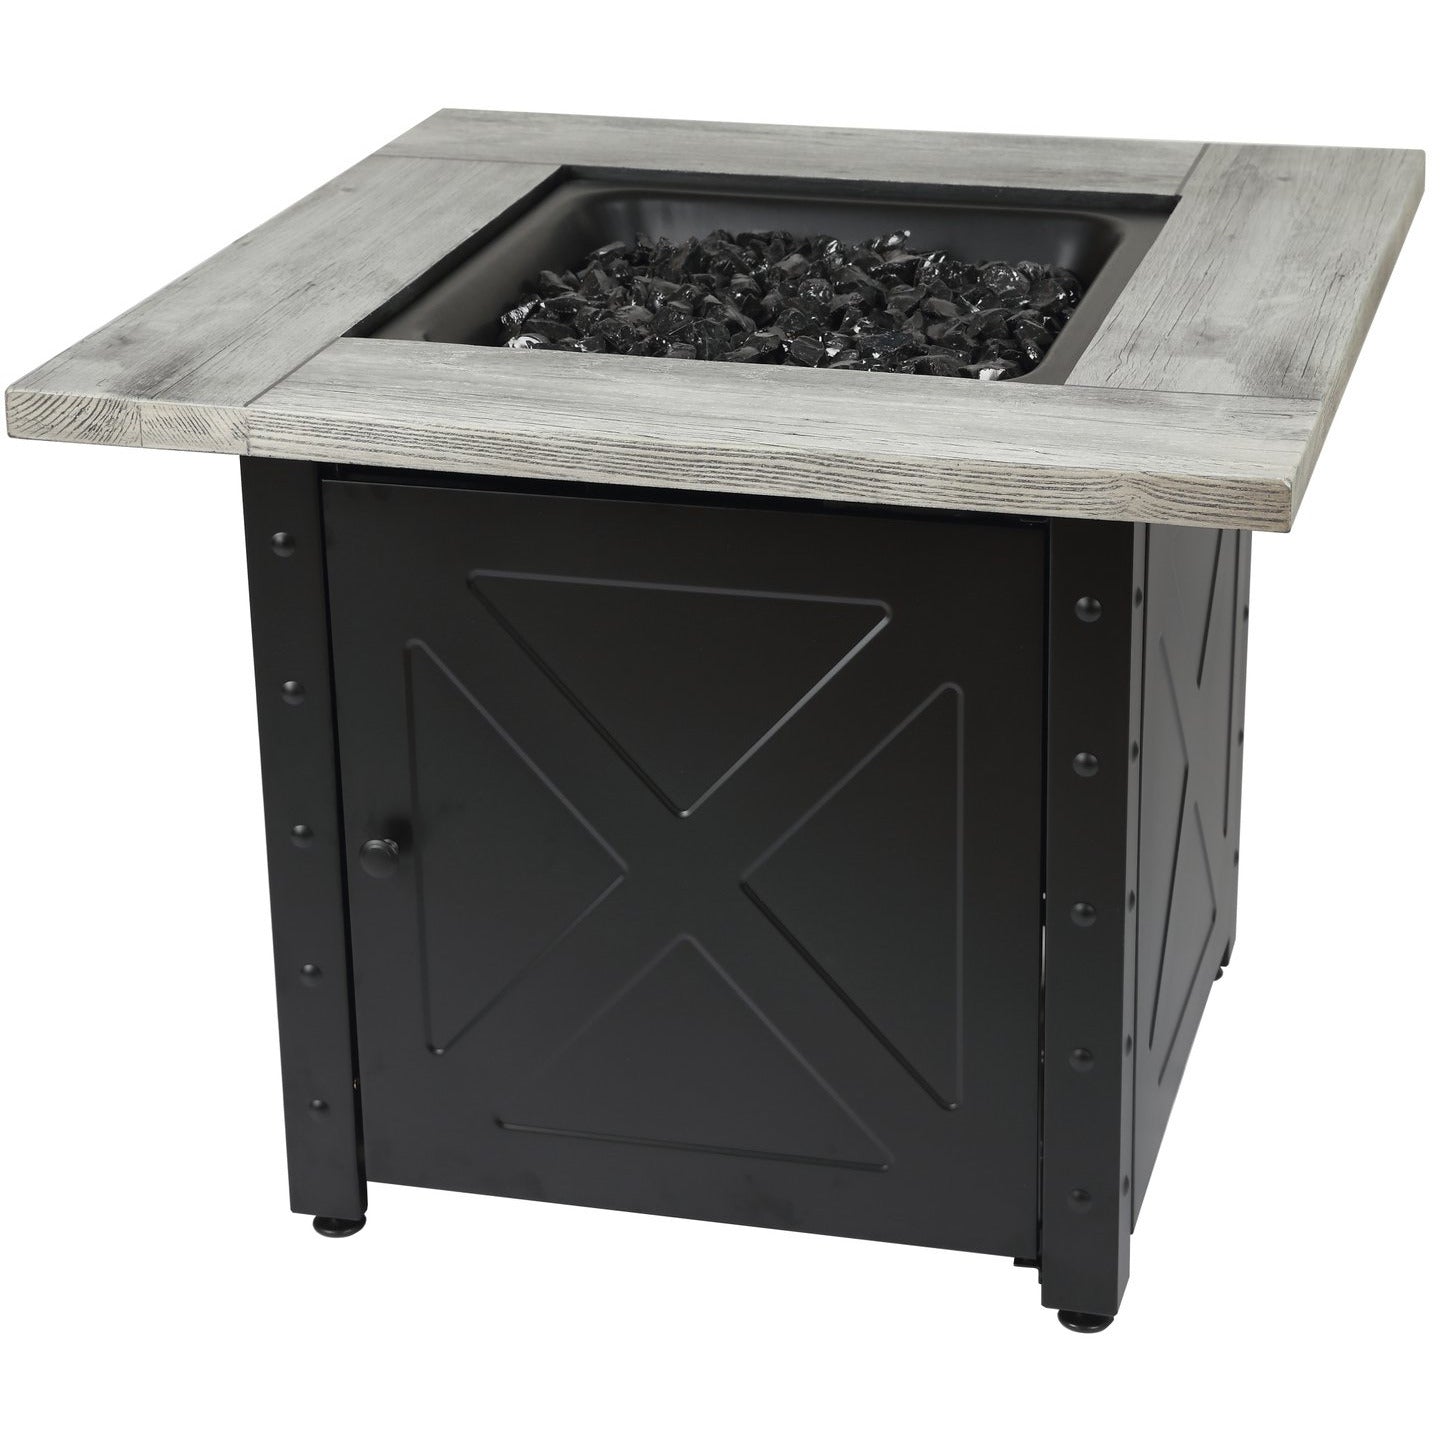 Endless Summer The Mason, 30" Square Gas Outdoor Fire Pit with Printed Wood Lat look Cement Resin Mantel GAD15300ES freeshipping - Luxury Tech Inc.